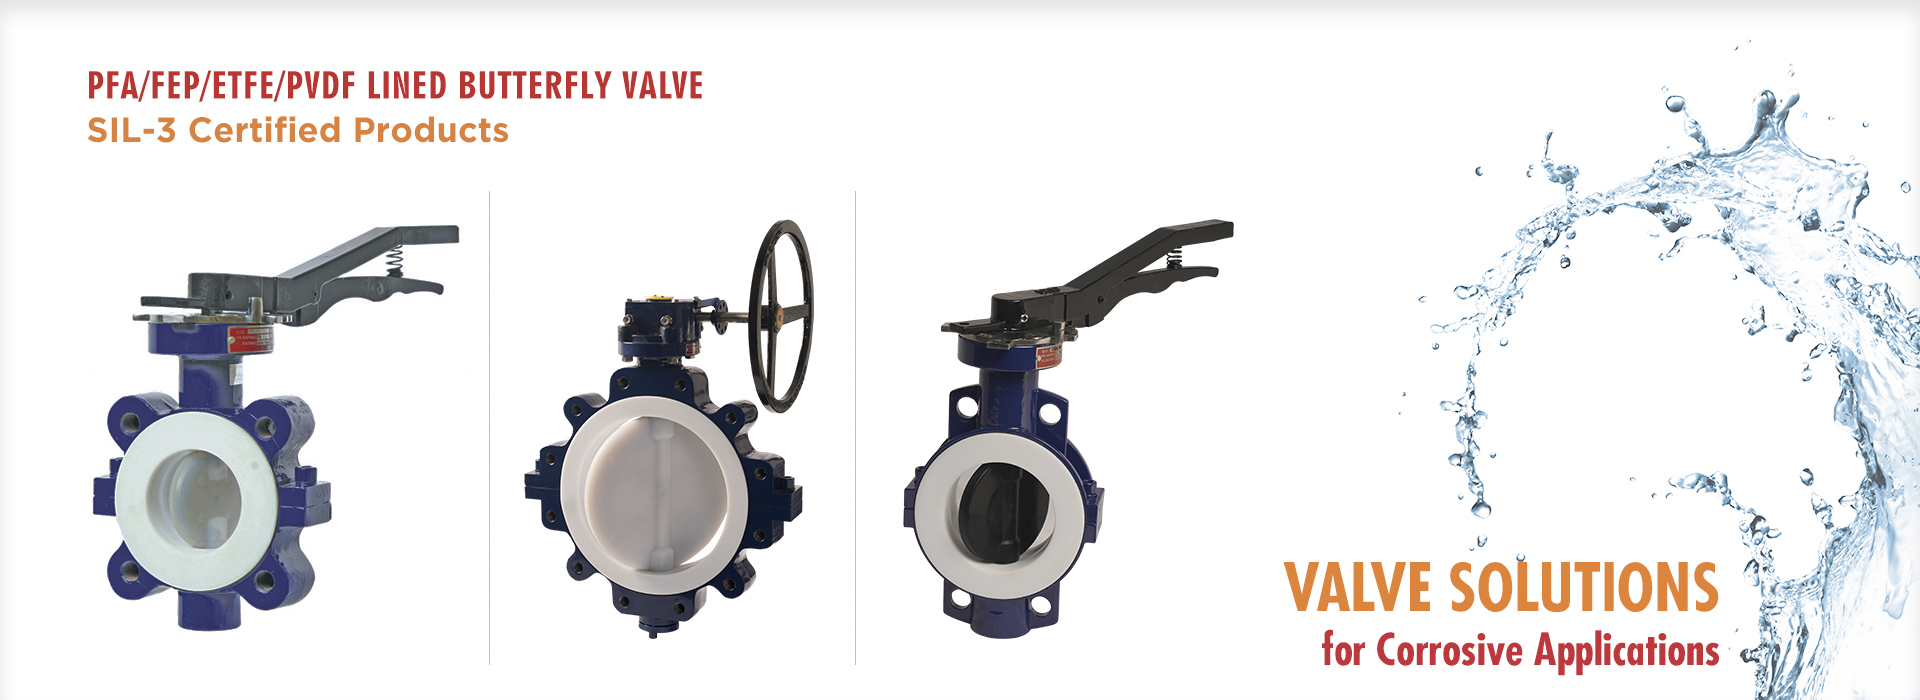 PFA/ FEP/ ETFE/ PVDF lined butterfly valve